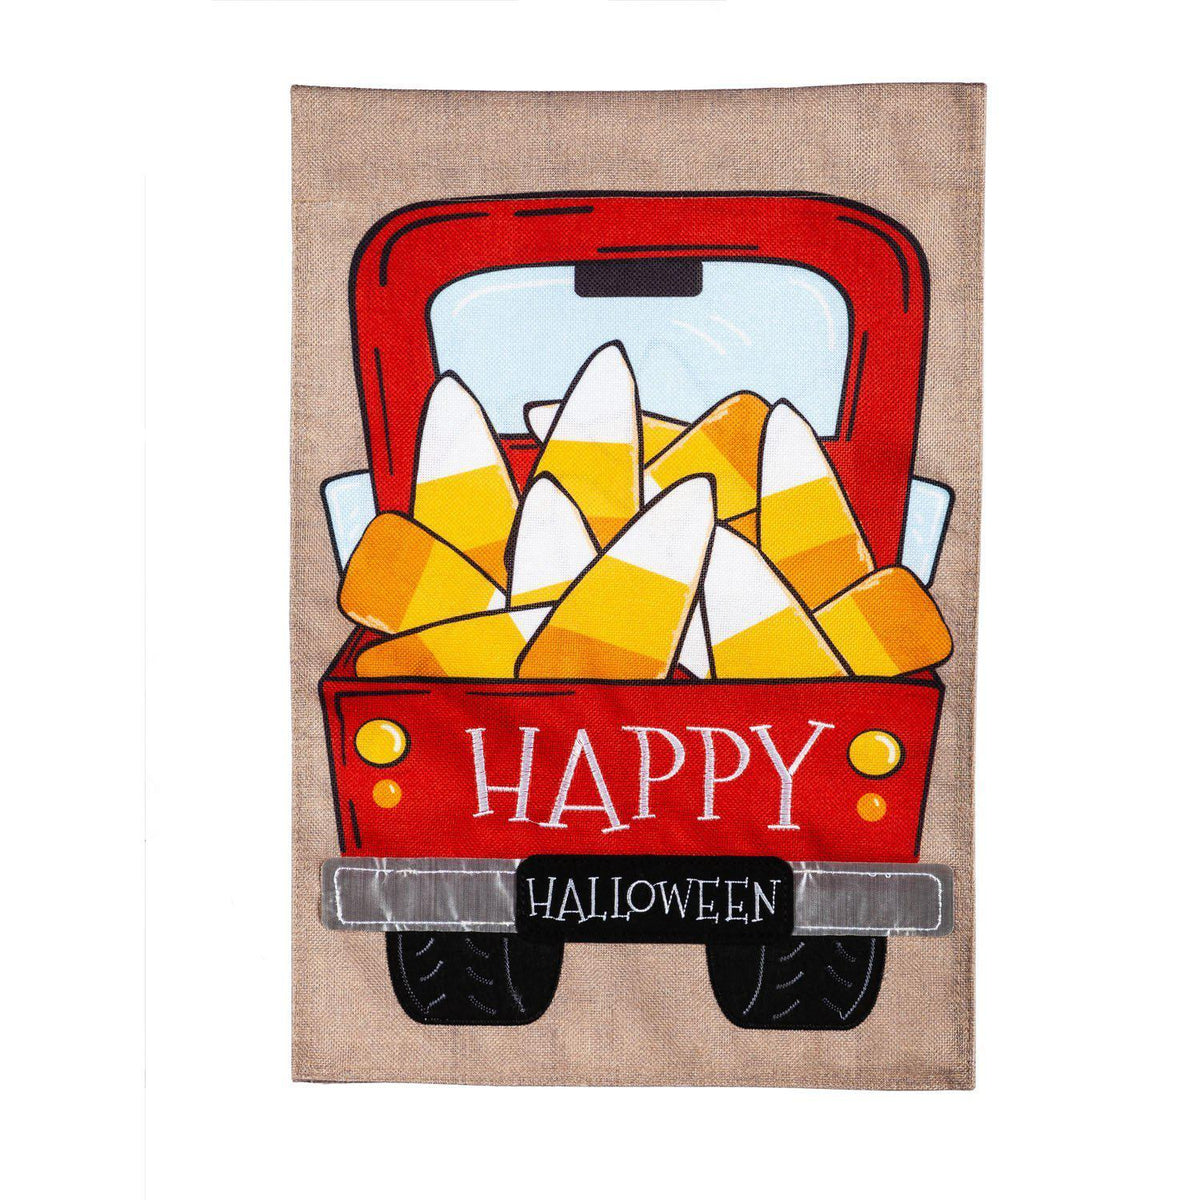 The Candy Corn Truck garden flag features a red truck full of candy corn and the words "Happy Halloween". 